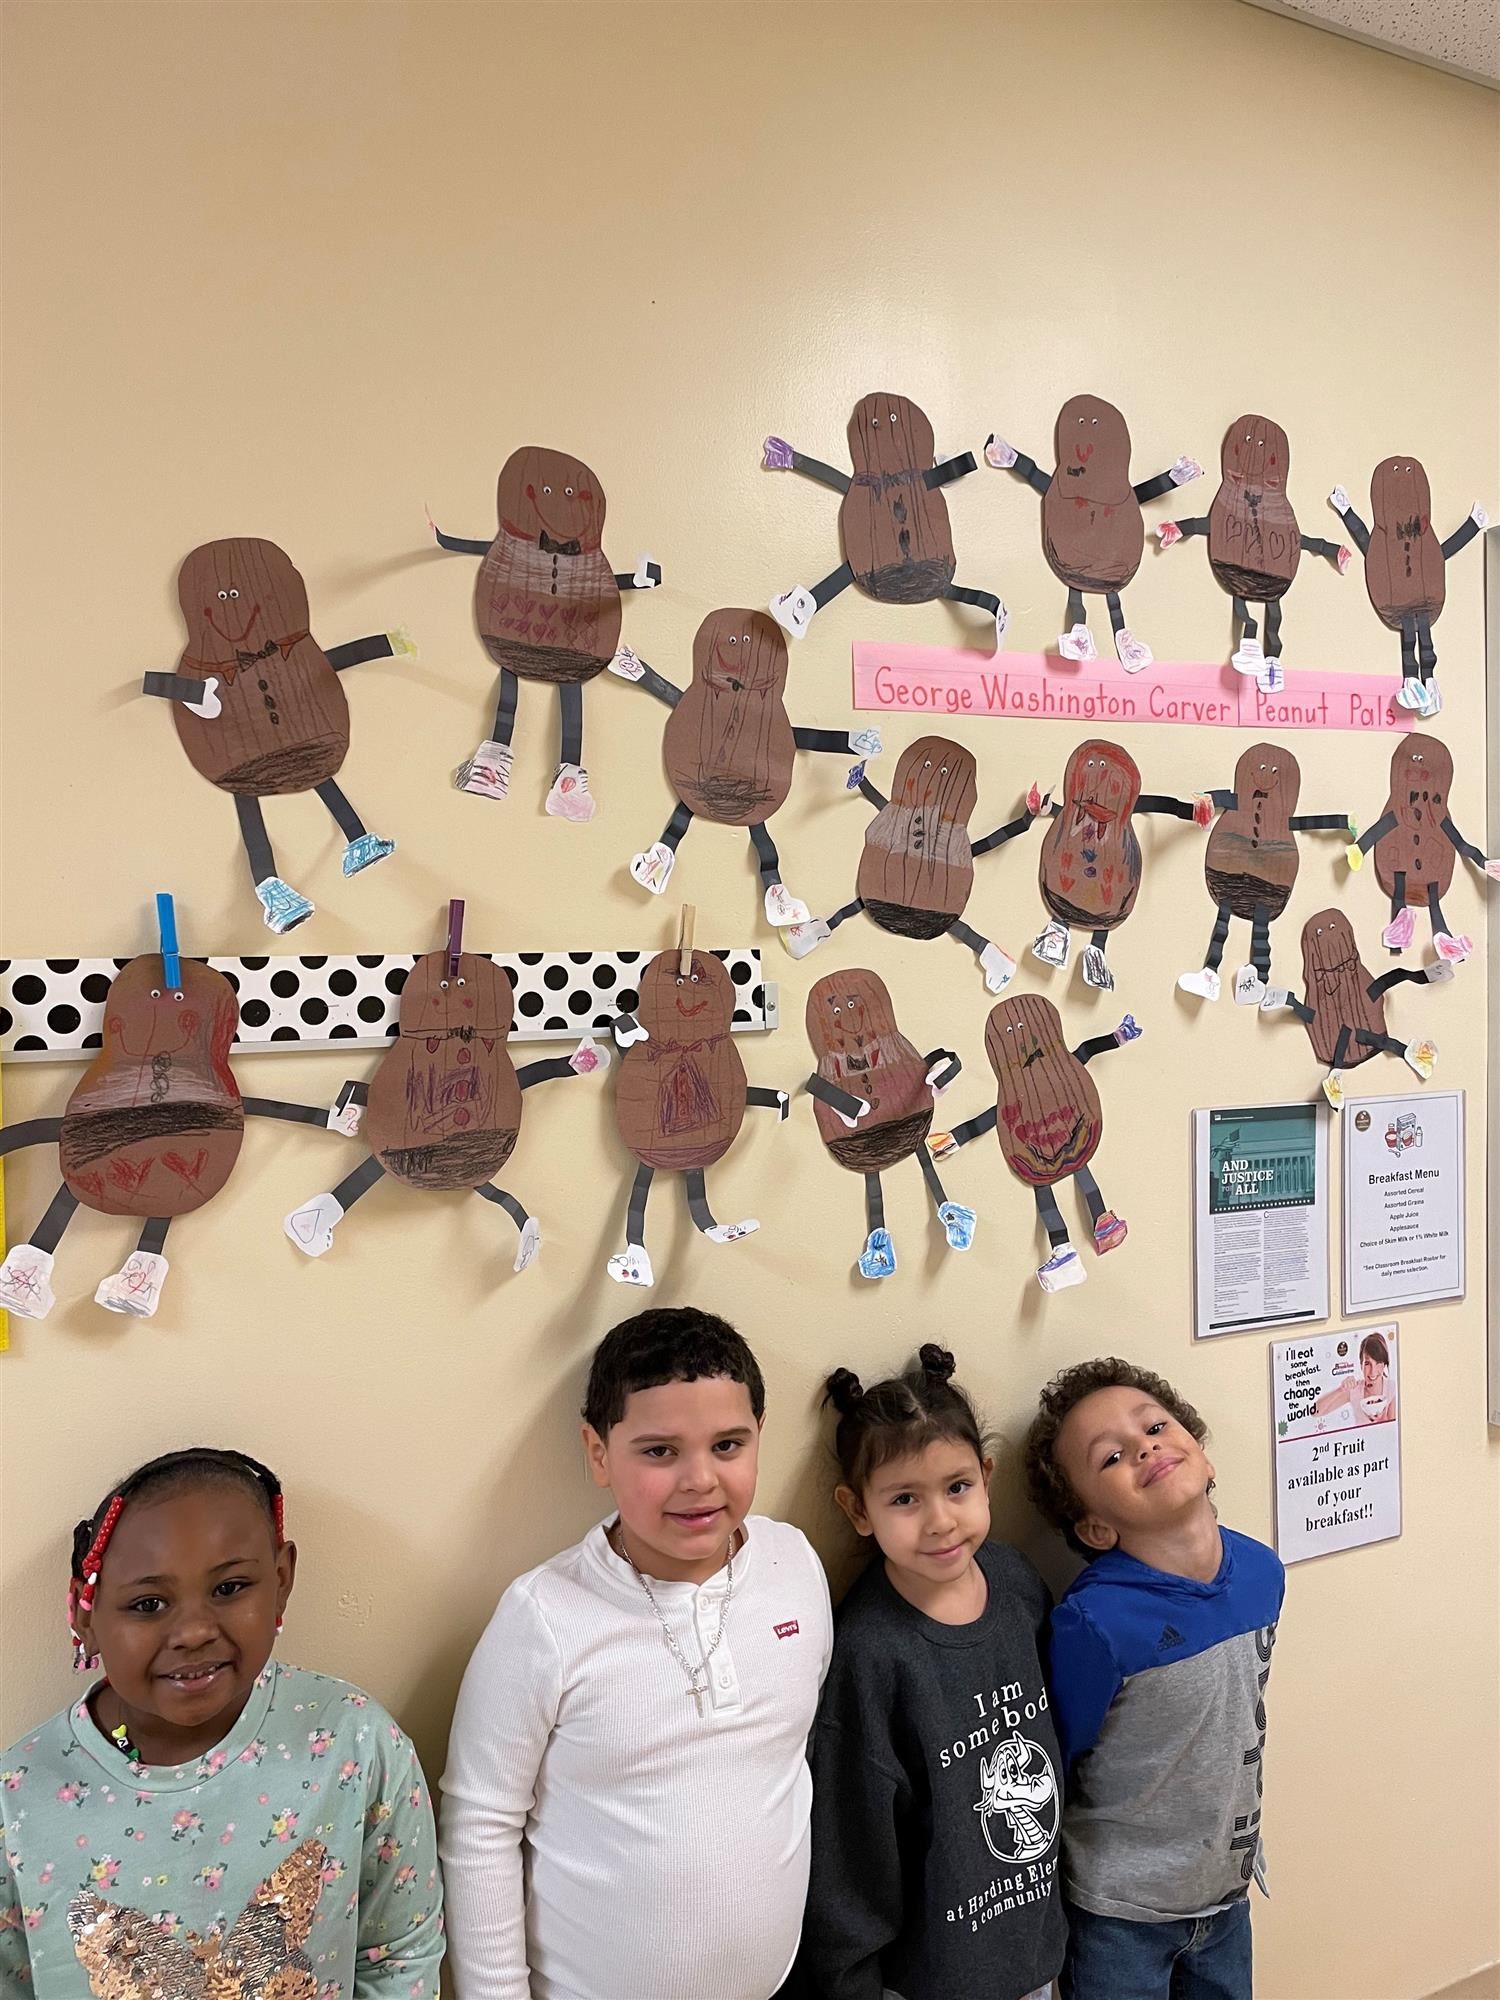 Students standing in front of a wall decorated with peanuts made out of construction paper in honor of Carver.